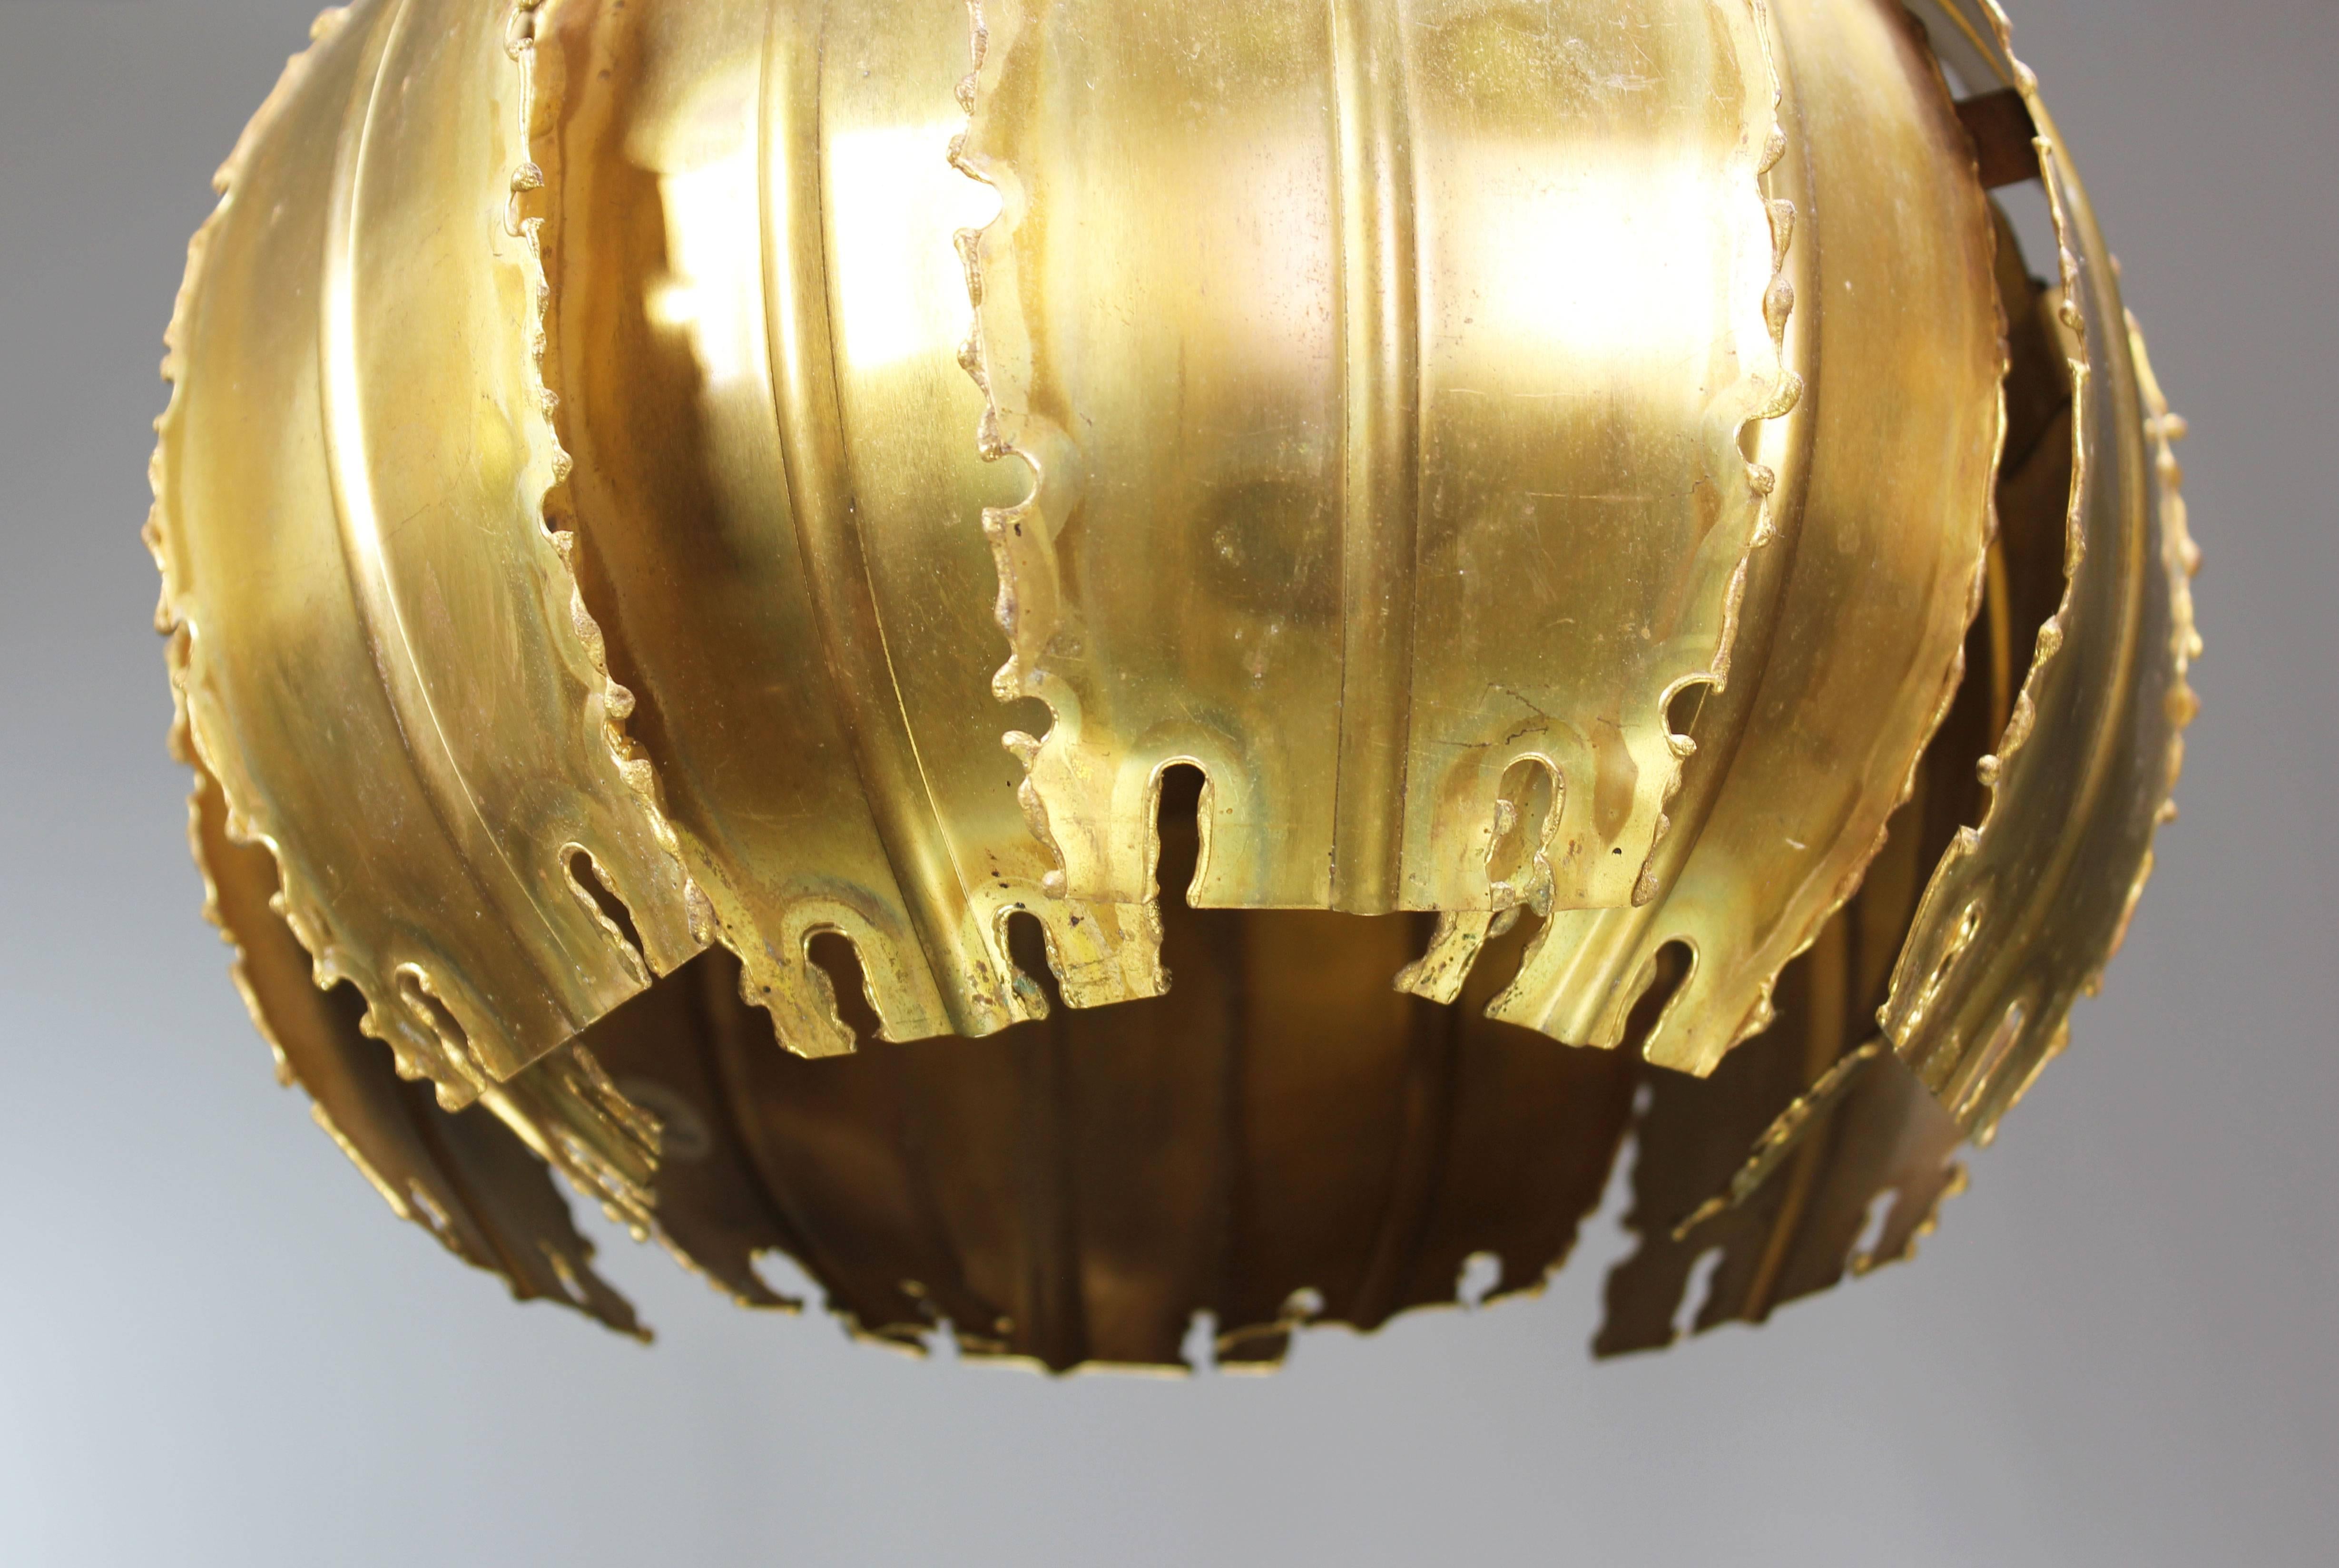 Handmade and cool Danish Mid Century Modern Brutalist brass pendant made of twelve plates of acid treated and flame cut brass in two layers designed by Svend Aage Holm Sørensen for his own company Holm Sørensen & Co. Manufactured in Denmark in the